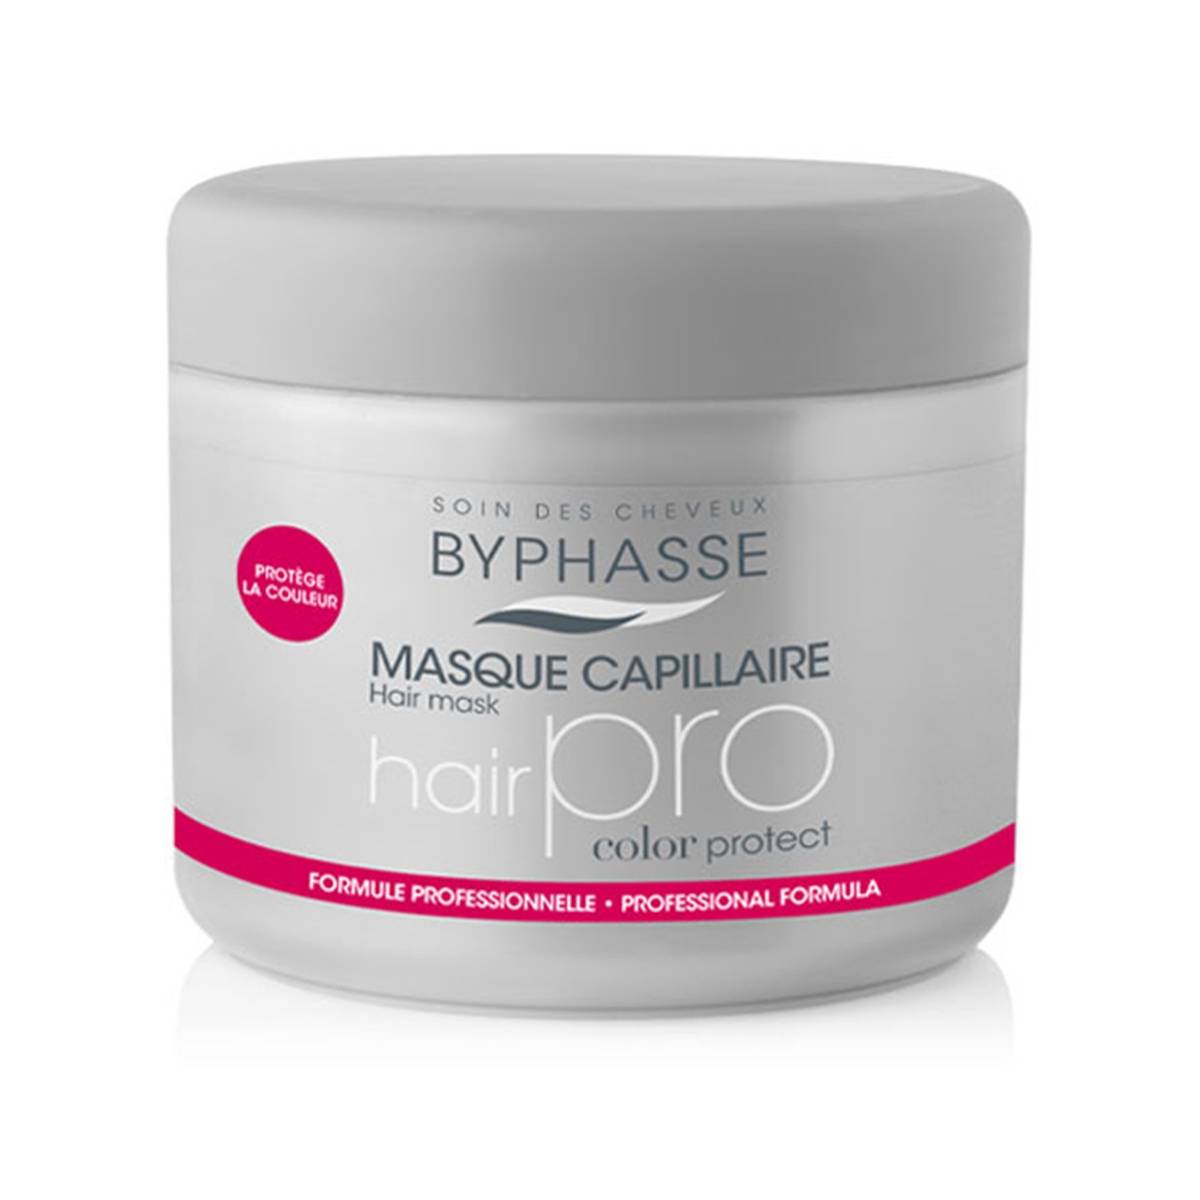 Masque Capillaire Hair Pro Byphasse